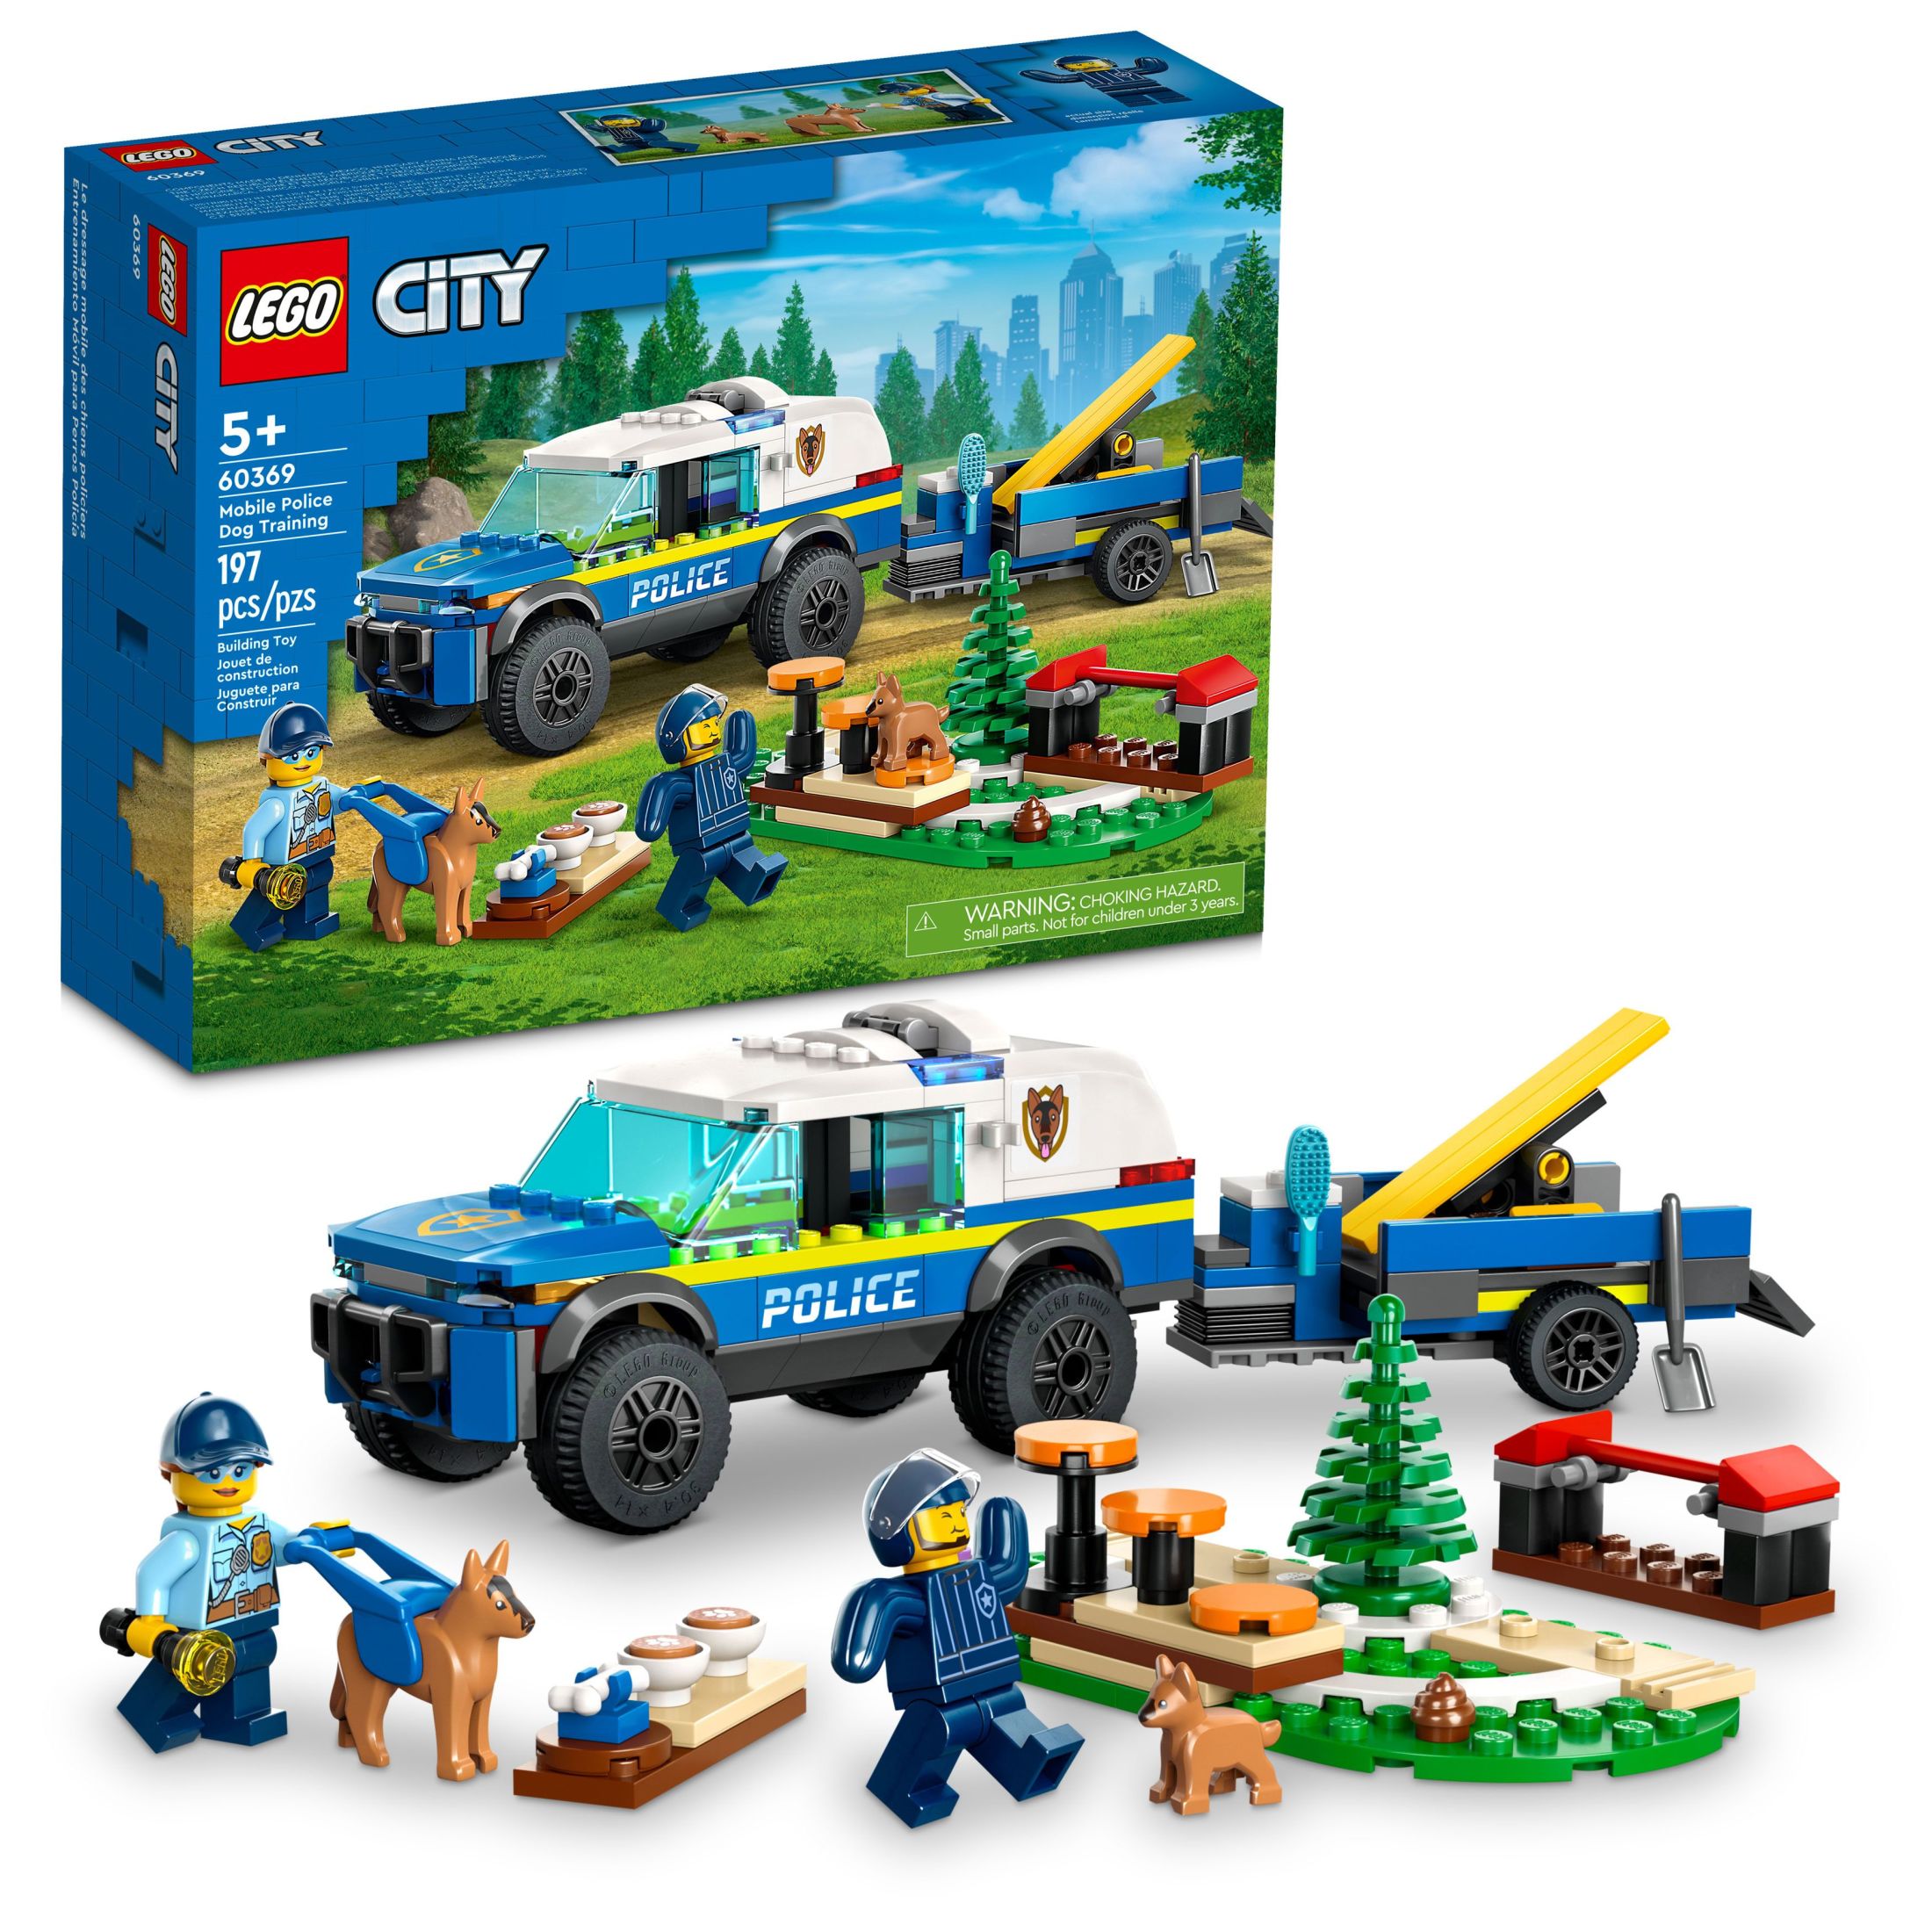 LEGO City Mobile Police Dog Training 60369, SUV Toy Car with Trailer, Obstacle Course and Puppy Figures, Animal Playset for Boys and Girls Ages 5 Plus - image 1 of 8